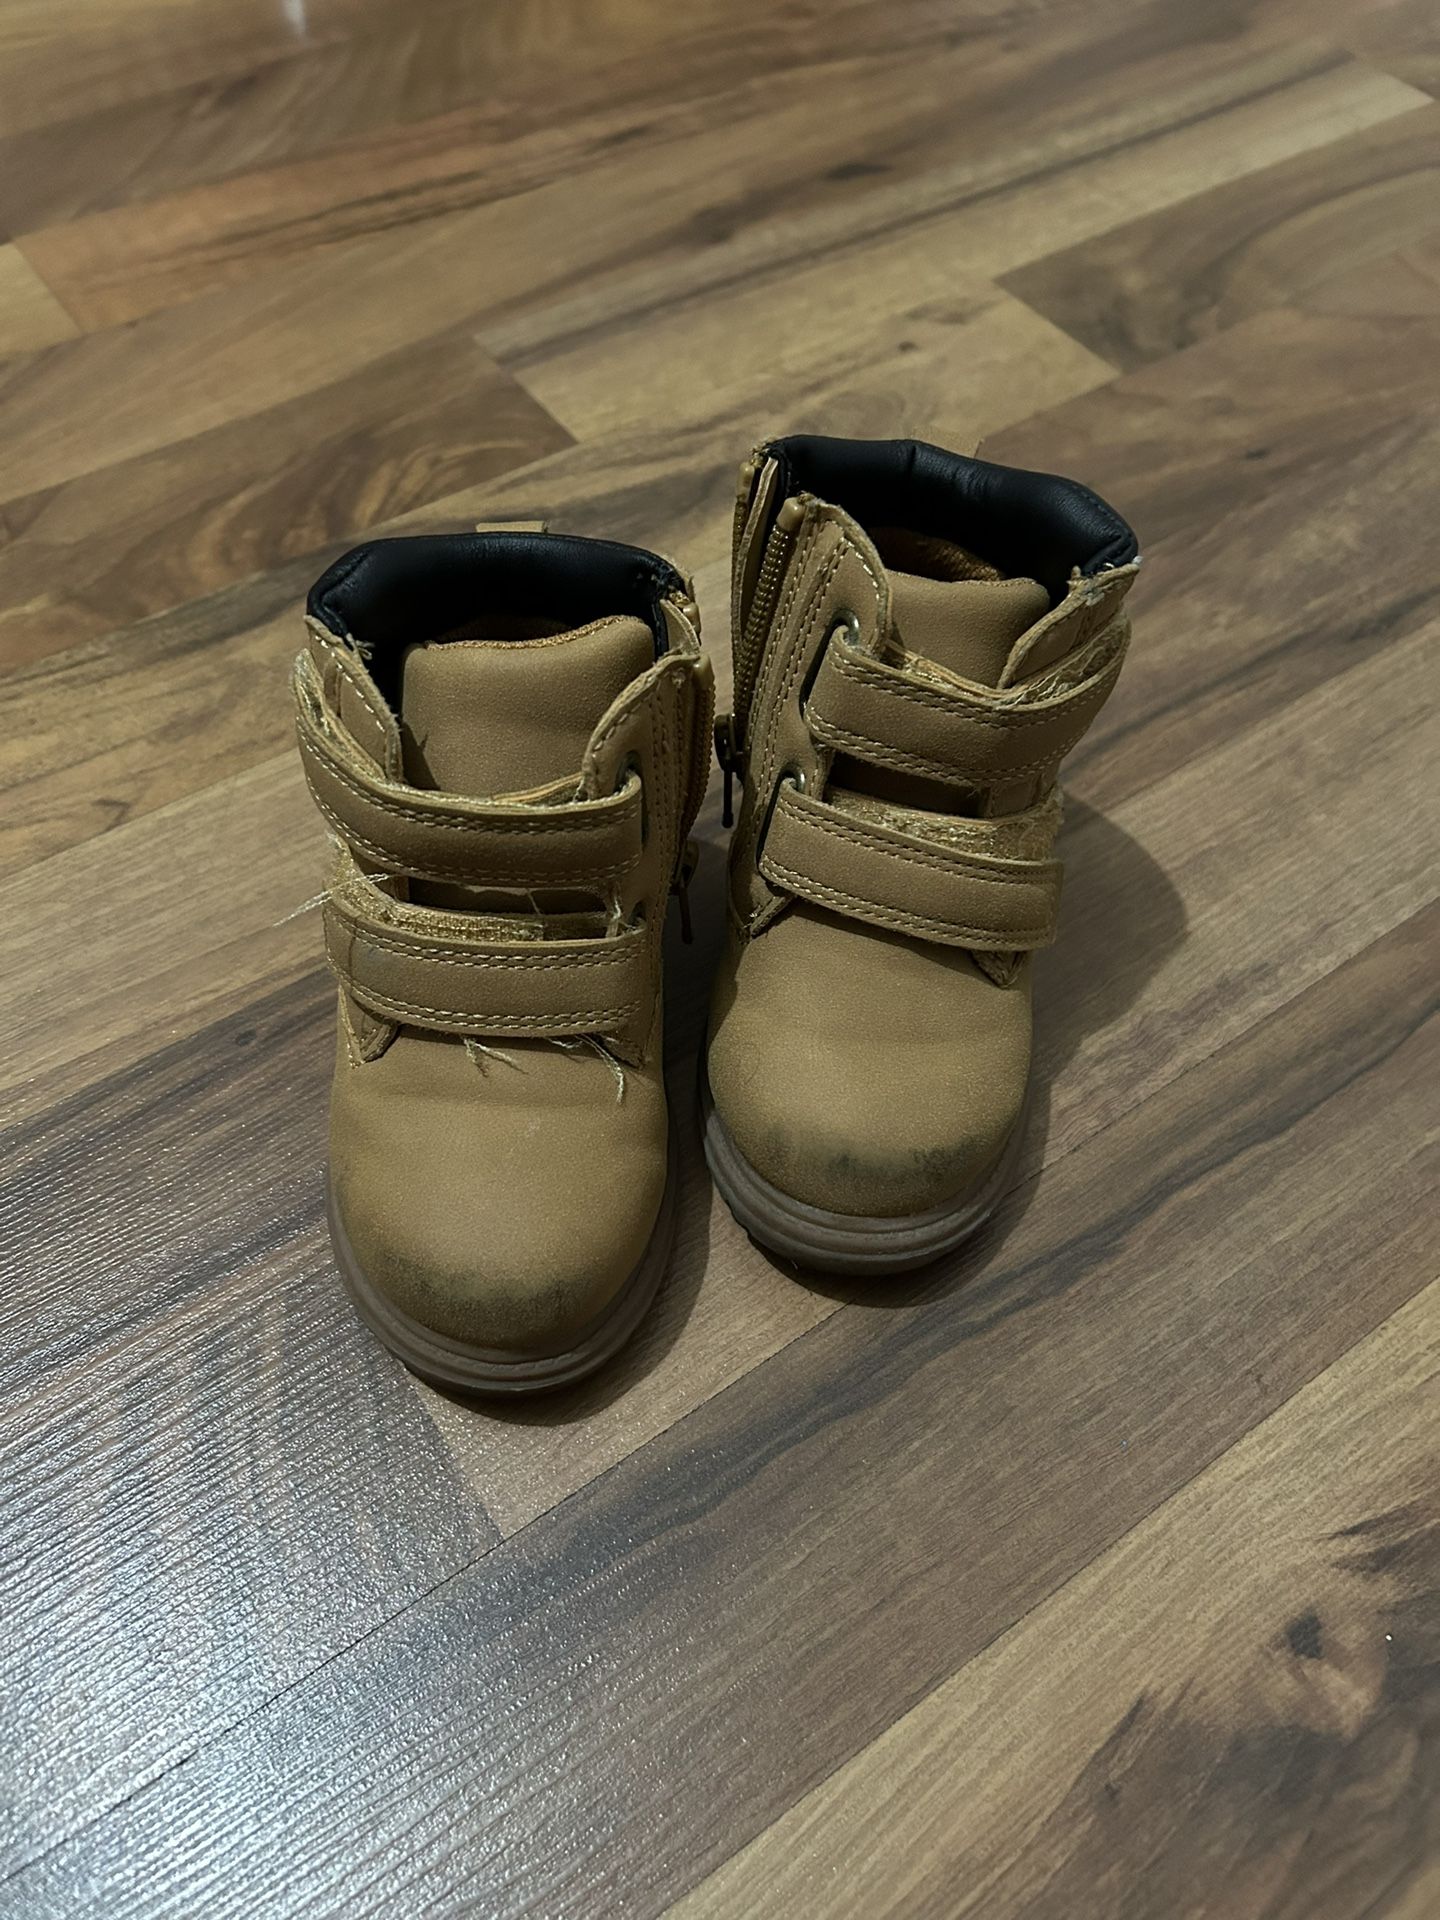 Toddler Size 4 Boots 